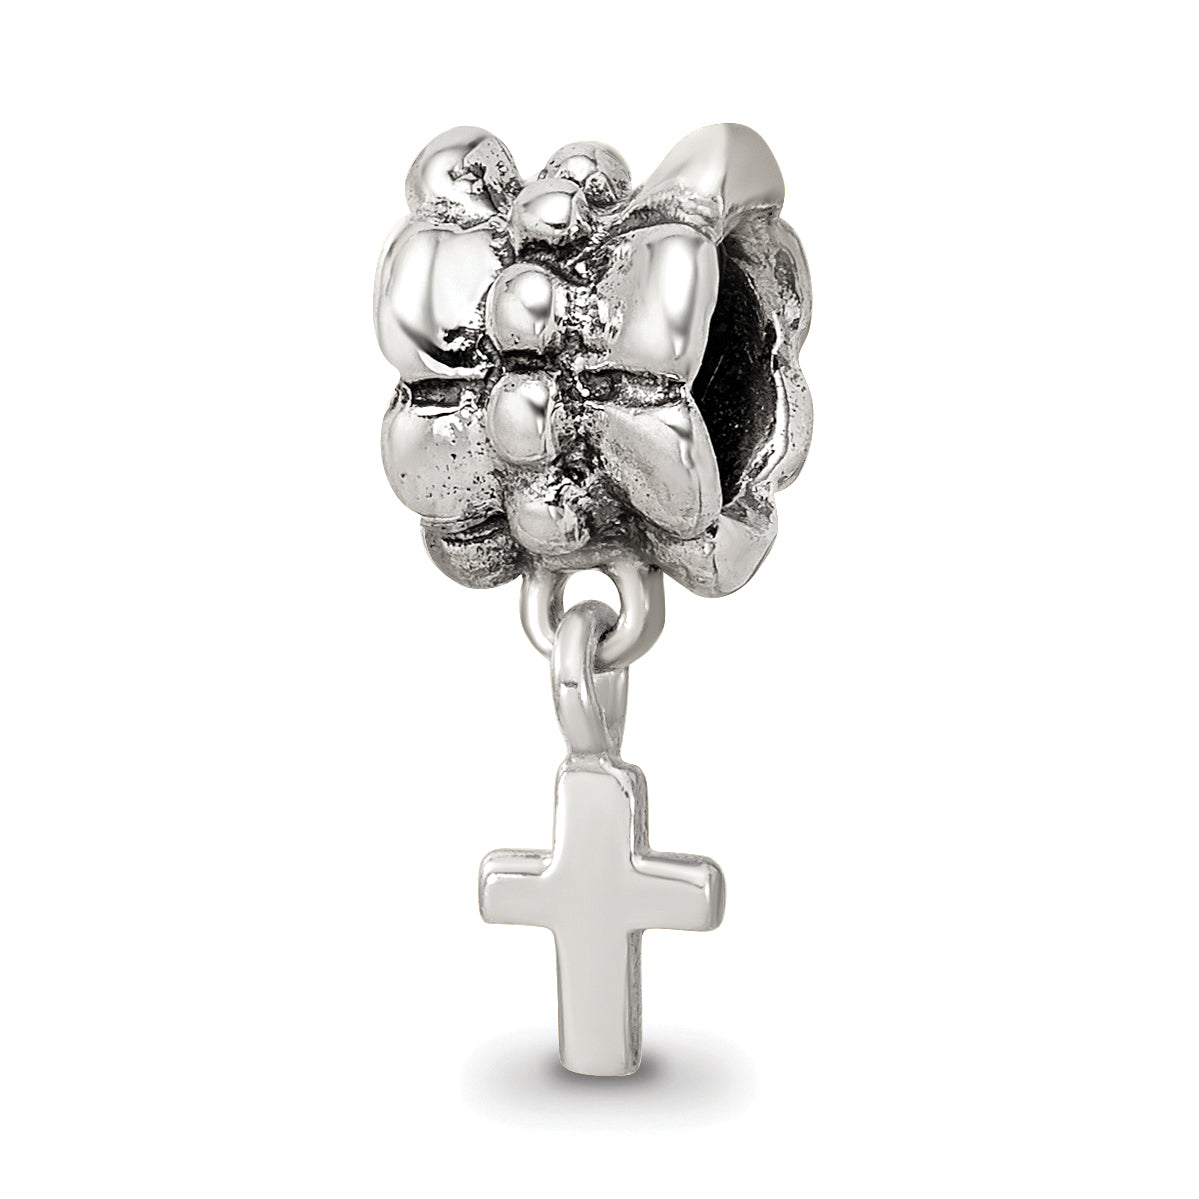 Sterling Silver Reflections Cross Dangle Bead